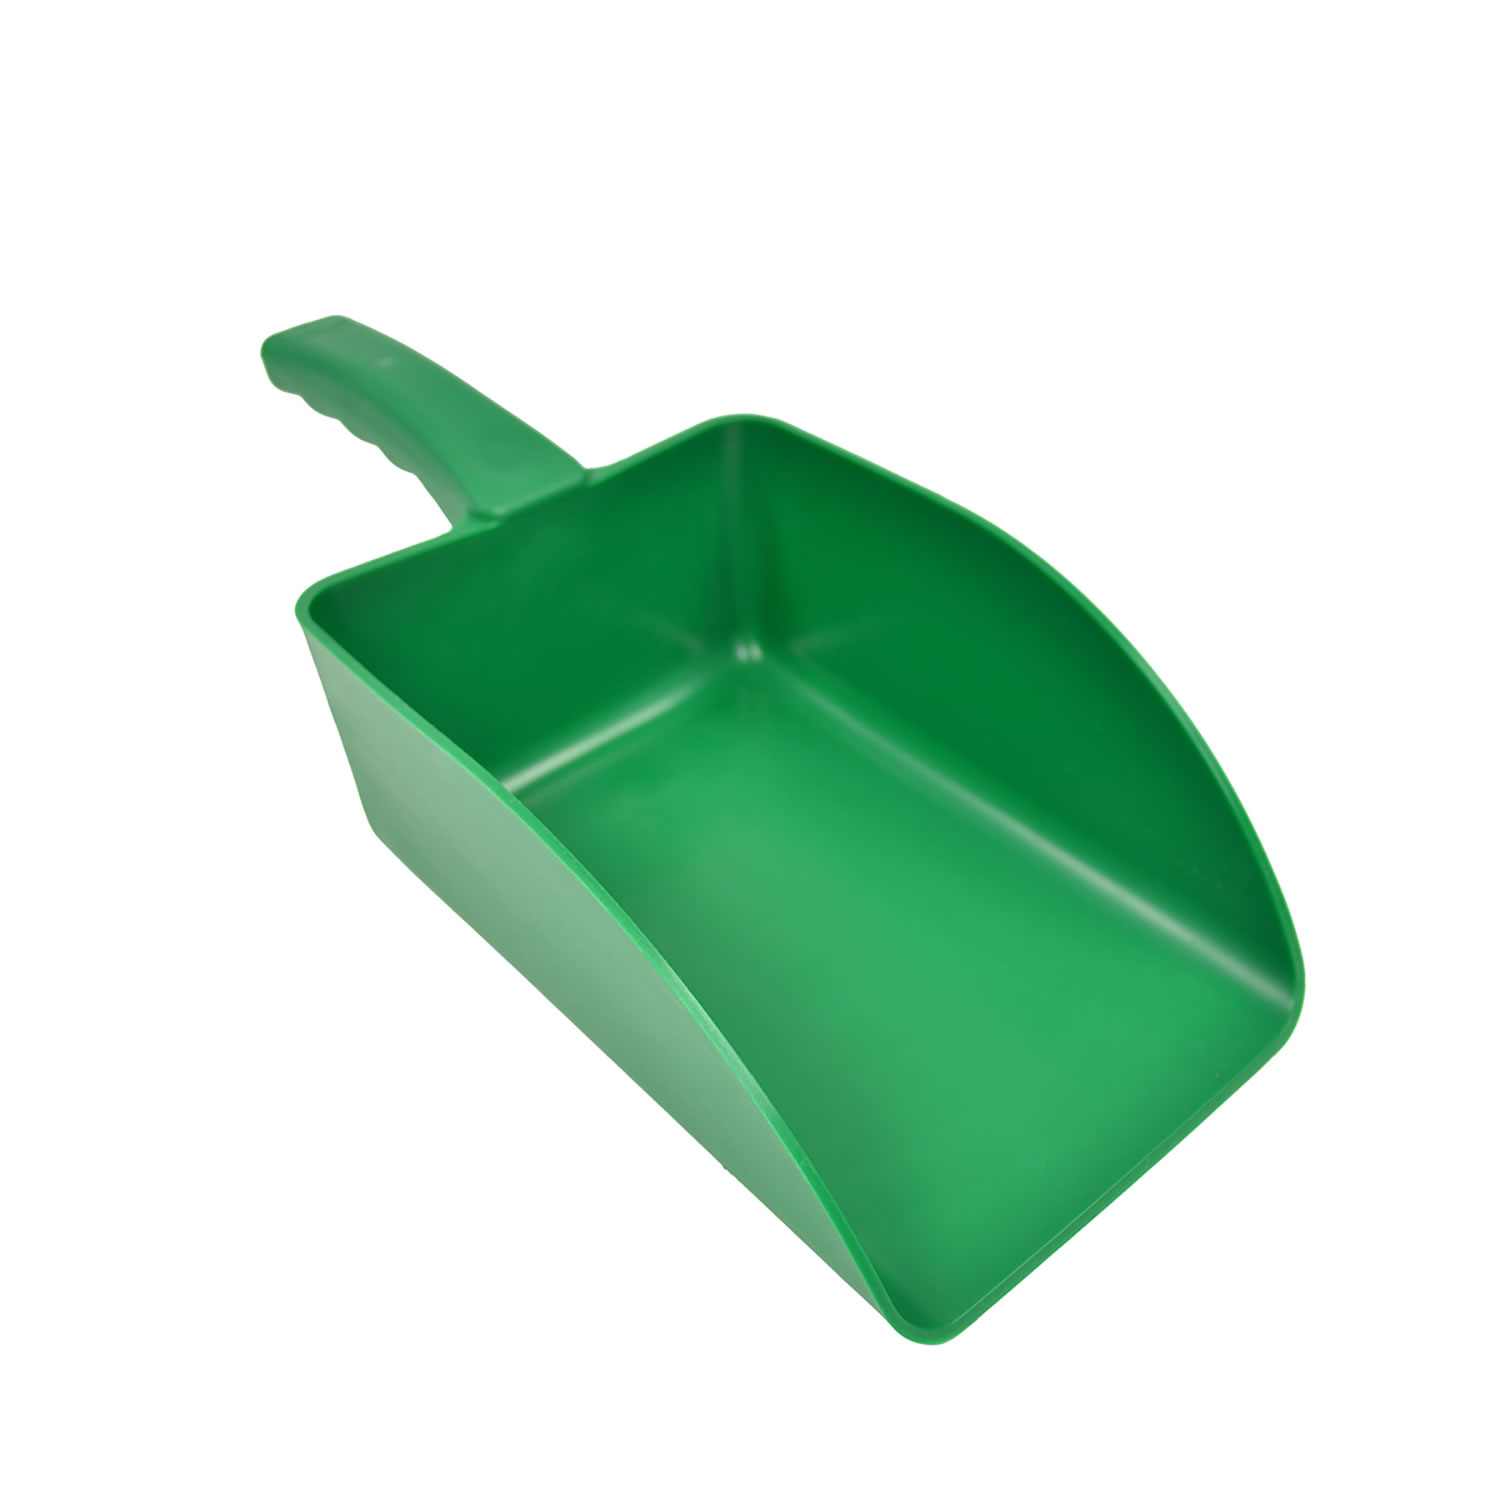 HAROLD MOORE HAND SCOOP SMALL GREEN SMALL